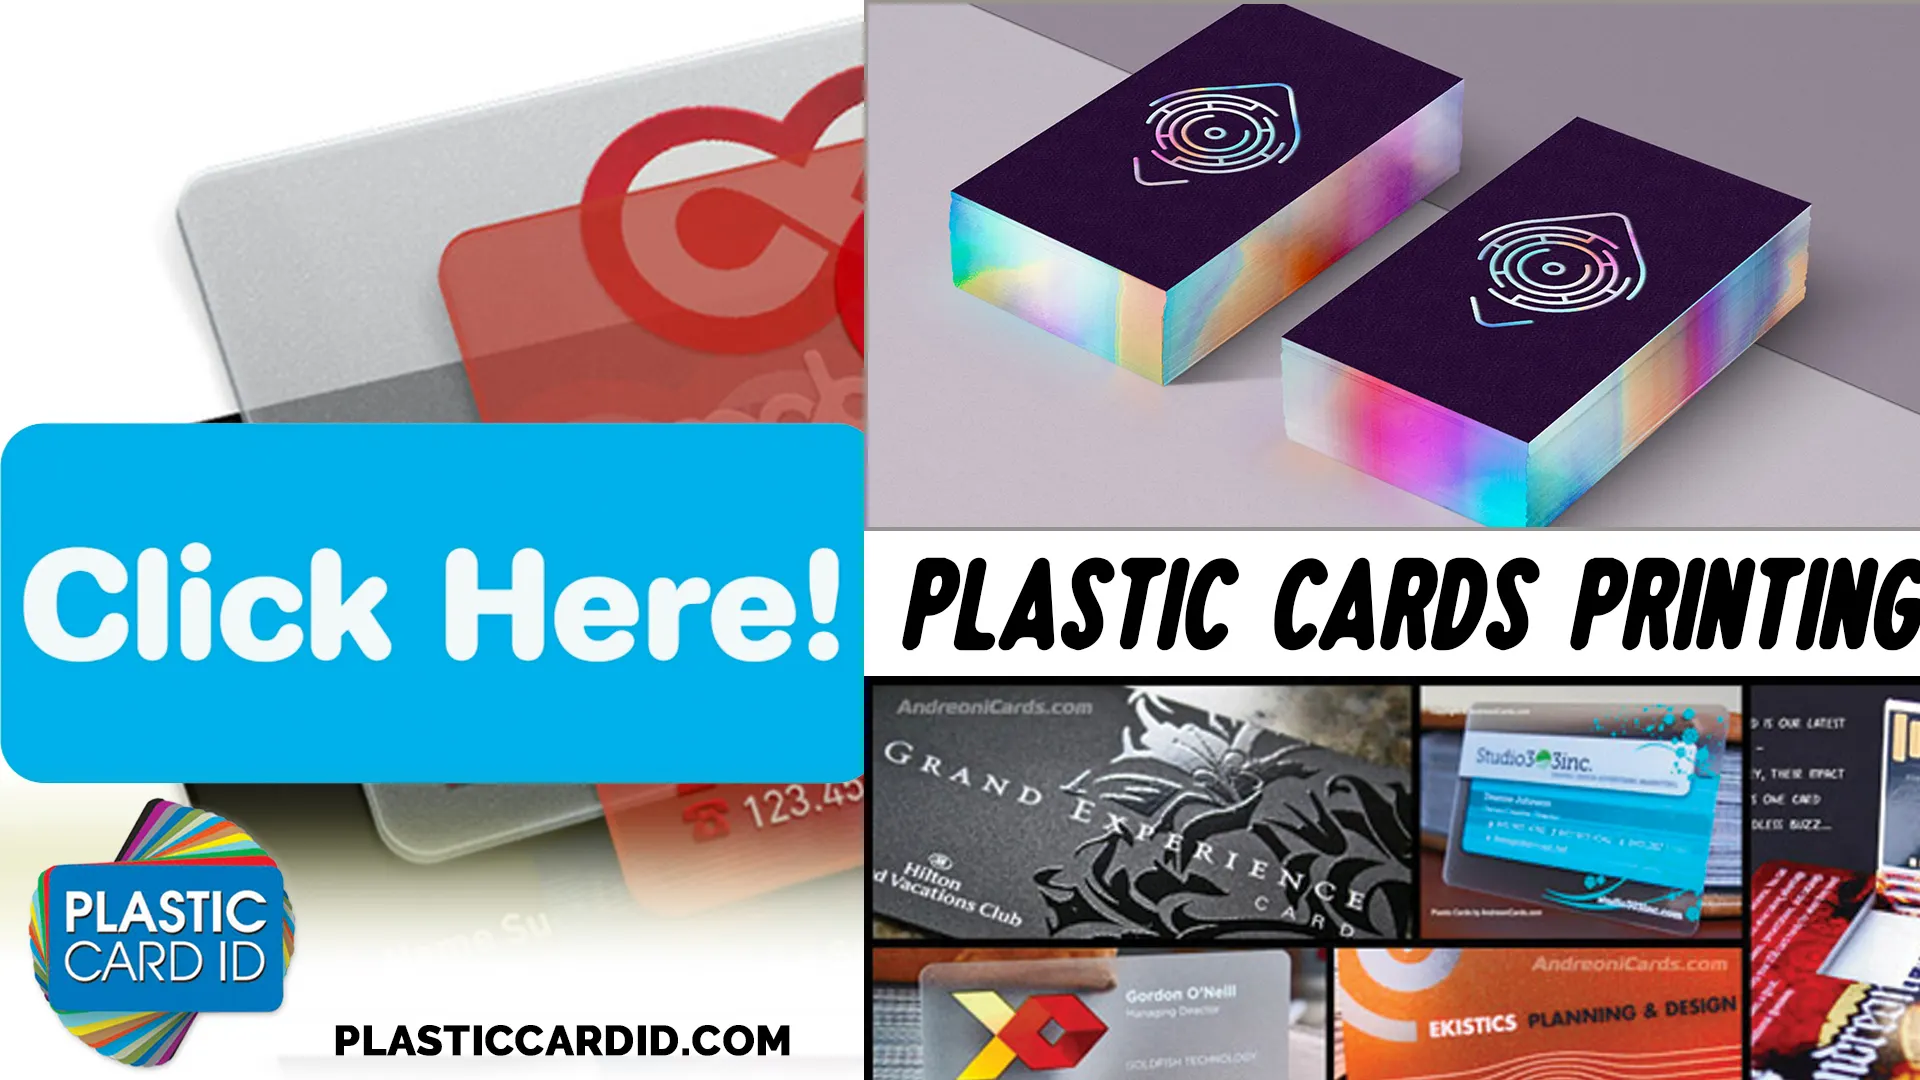 Welcome to a World of Cutting-Edge Plastic Card Designs